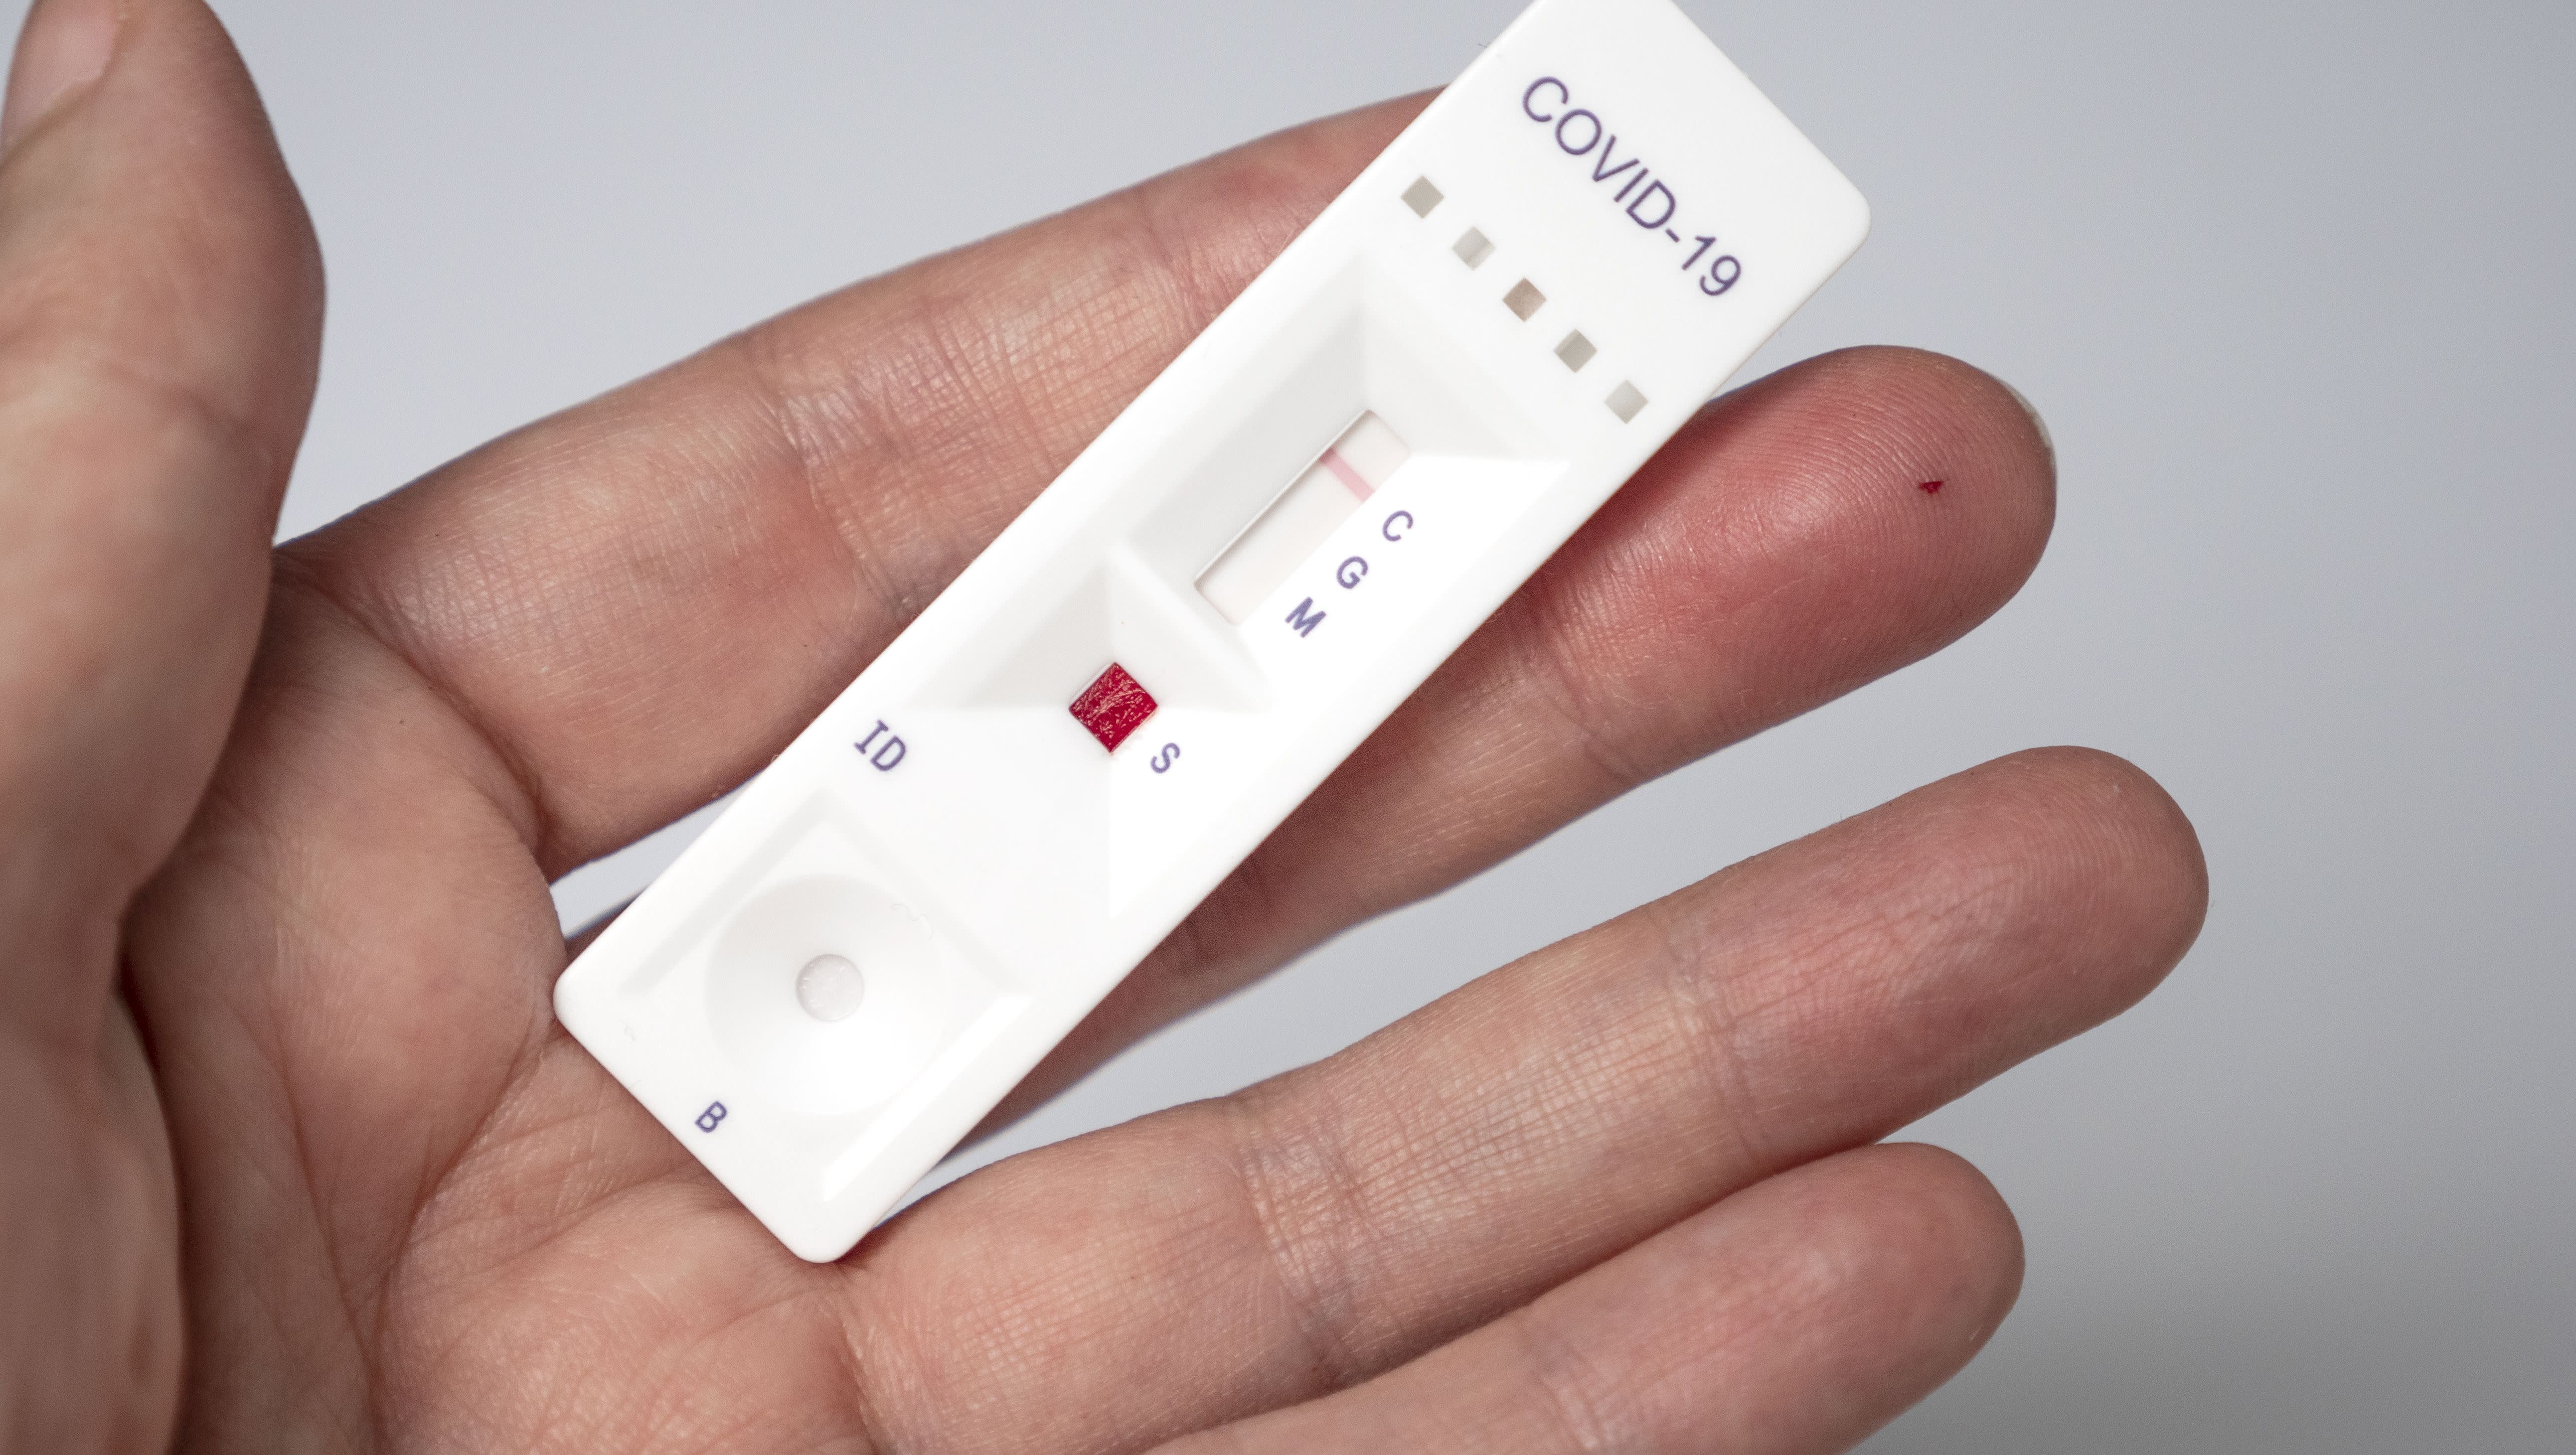 Everlywell's FDA-authorized COVID-19 test kit launches [Video]